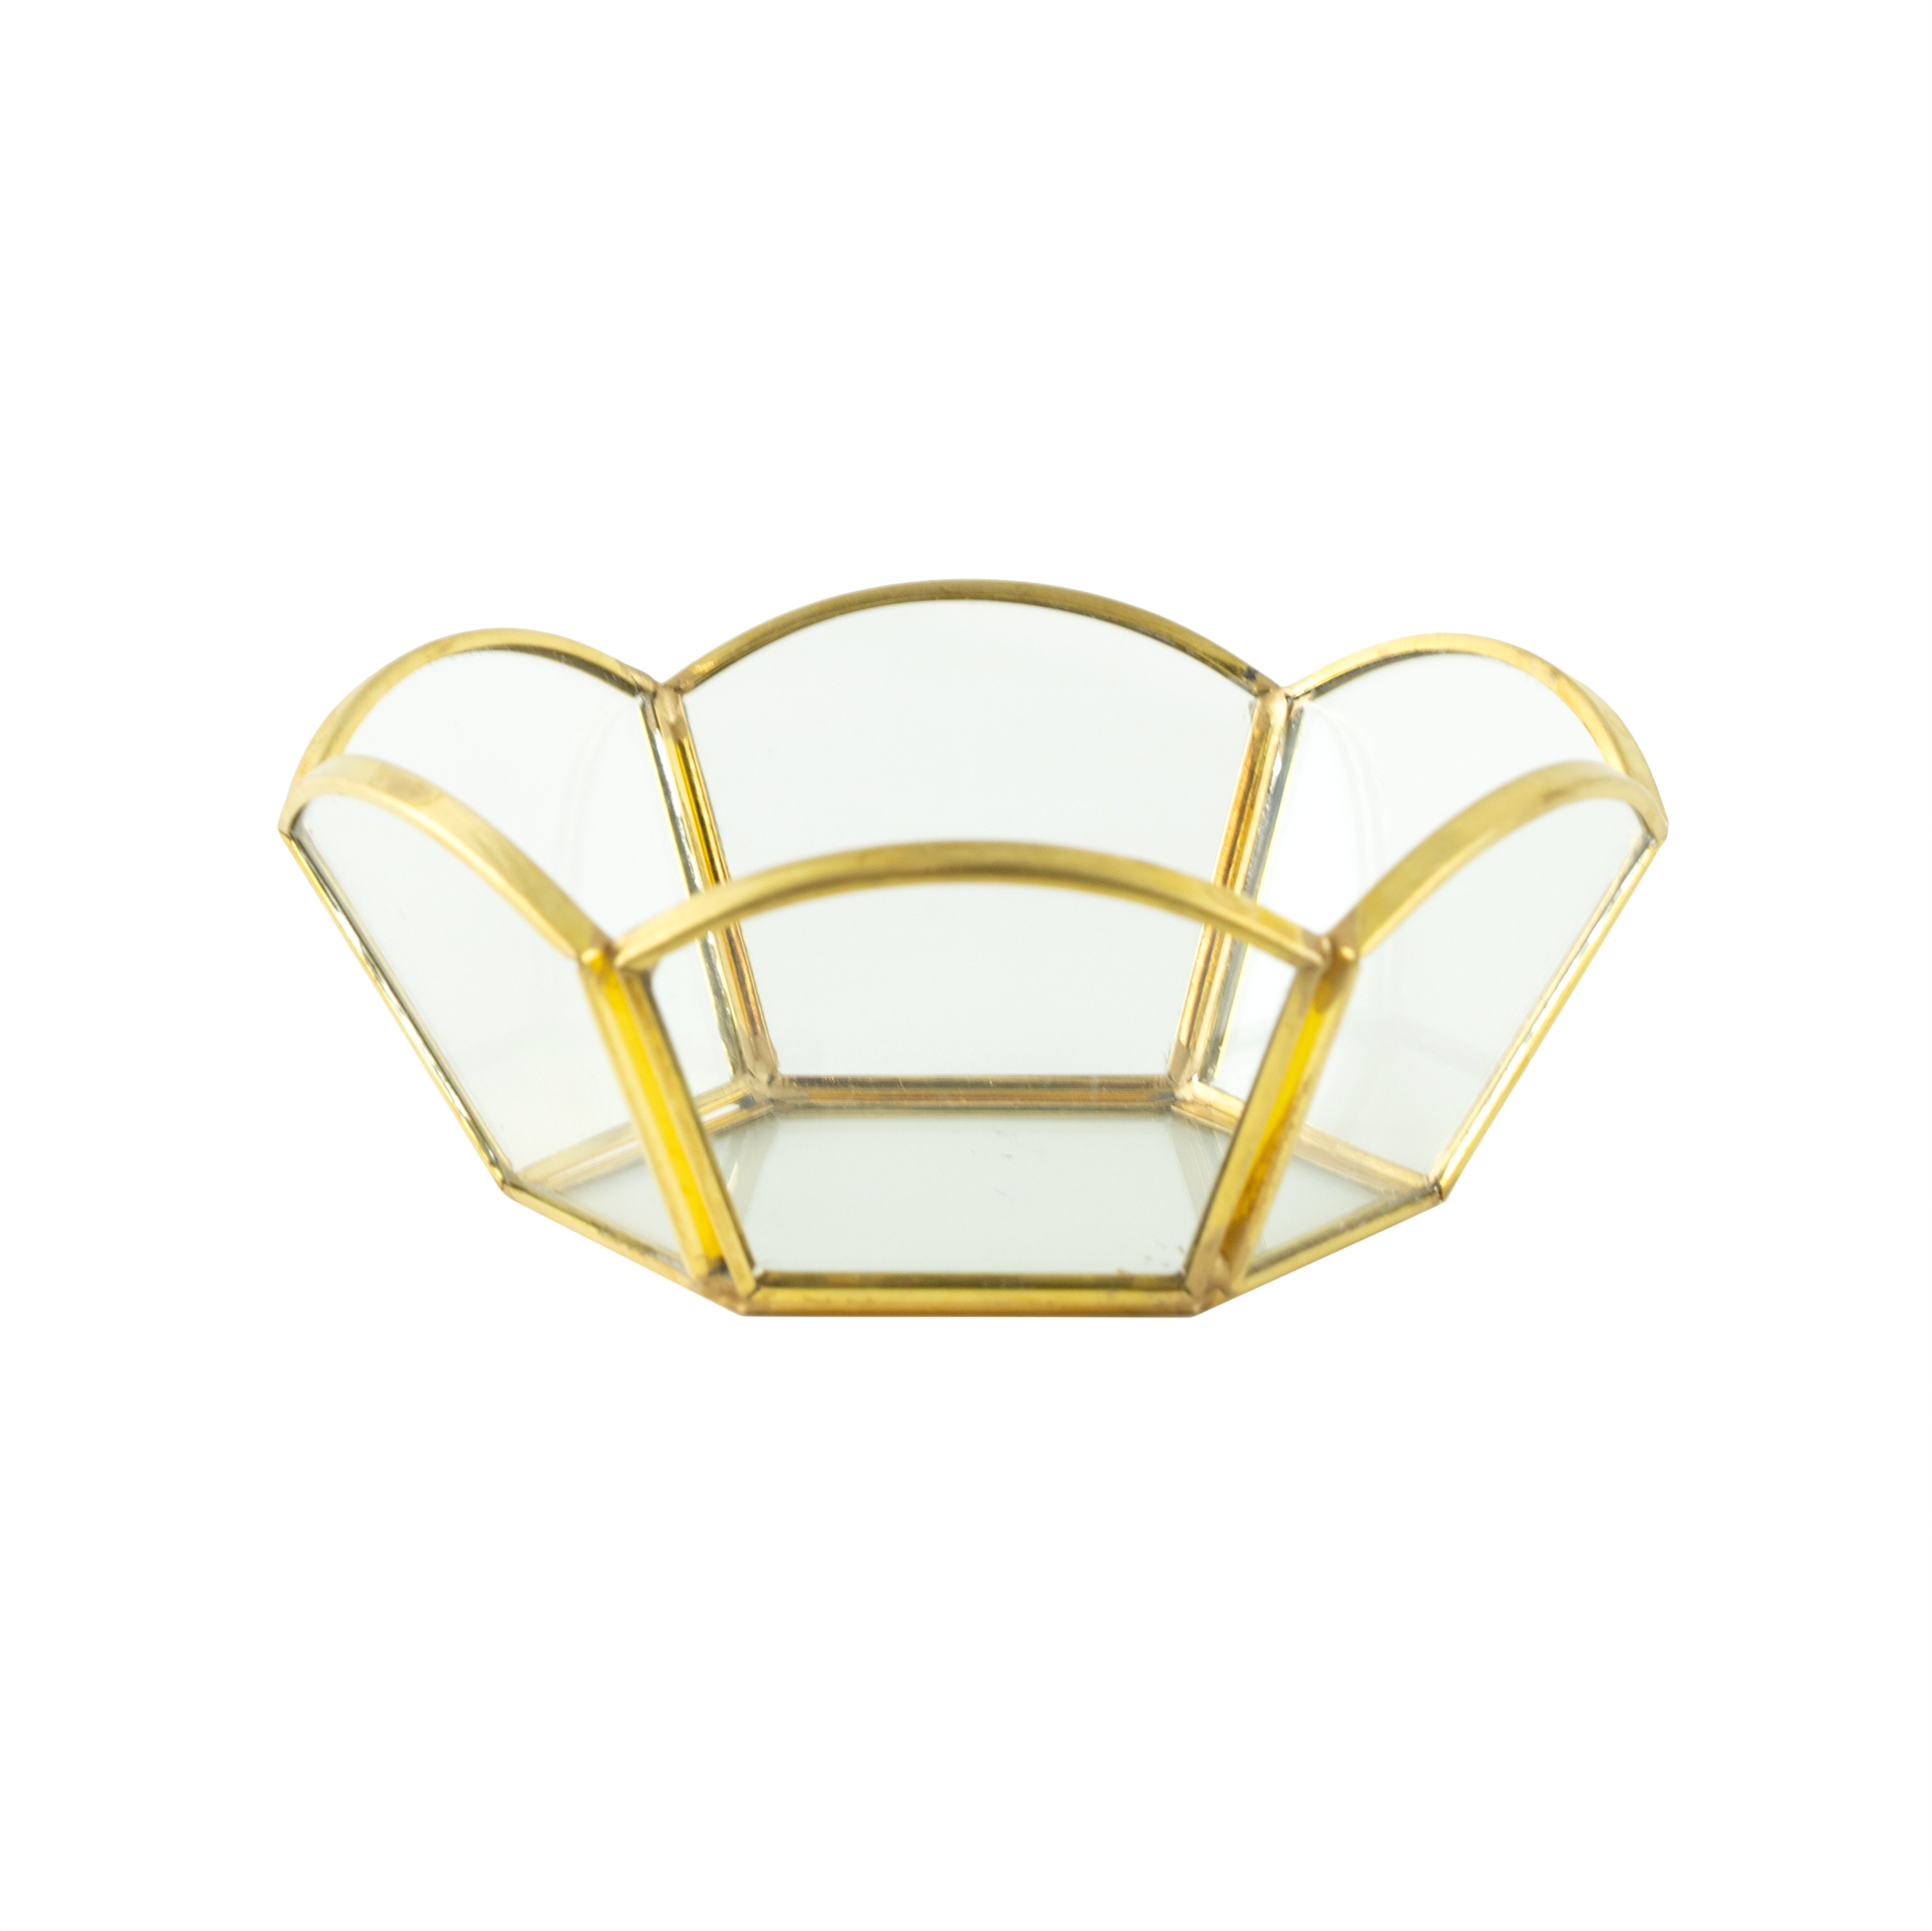 Brass and Glass Gold 4.4" Tabletop Trinket Tray with Decorative Petals - image 1 of 7